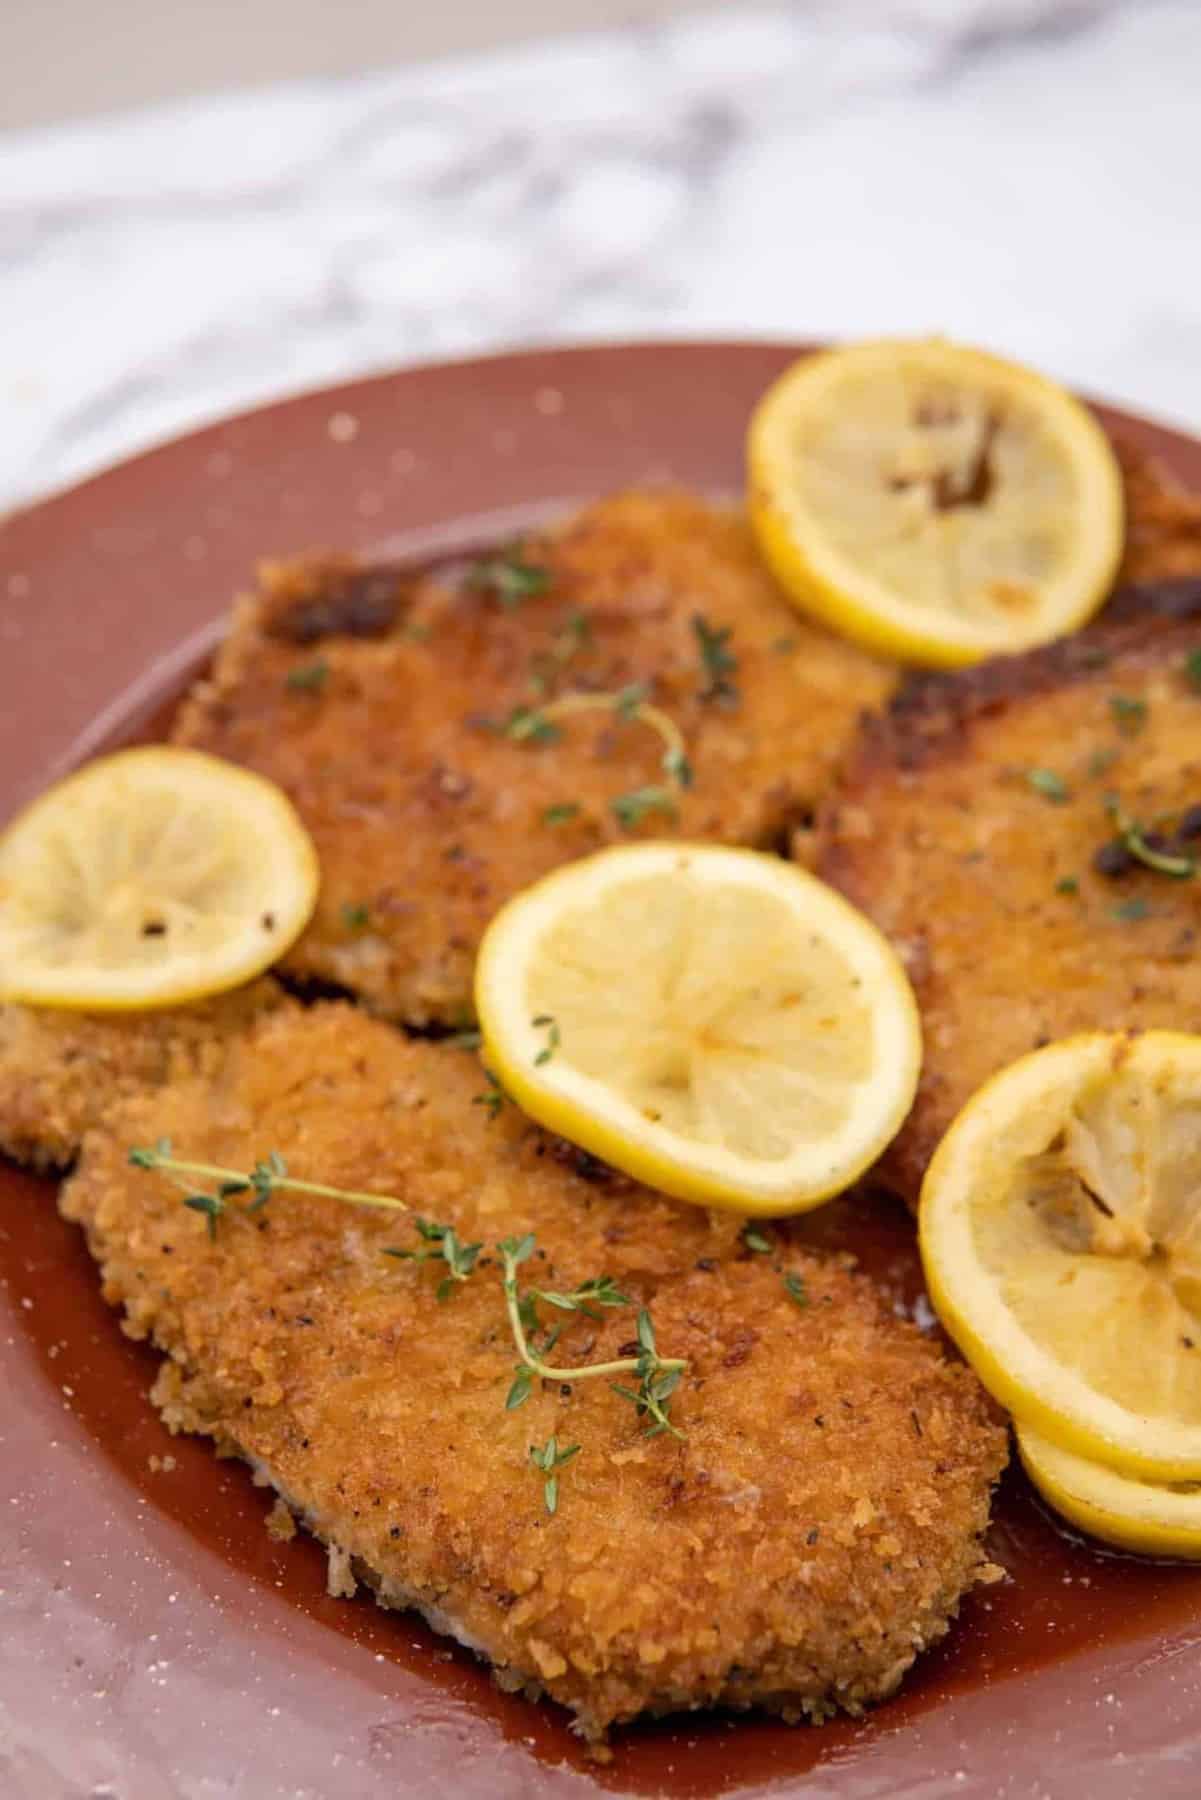 Serve the pork schnitzel hot with your favorite sides such as mashed potatoes, roasted vegetables, or a fresh salad. Squeeze some additional lemon juice over the schnitzel before eating for extra tanginess. Enjoy this Pork Schnitzel Recipe. 